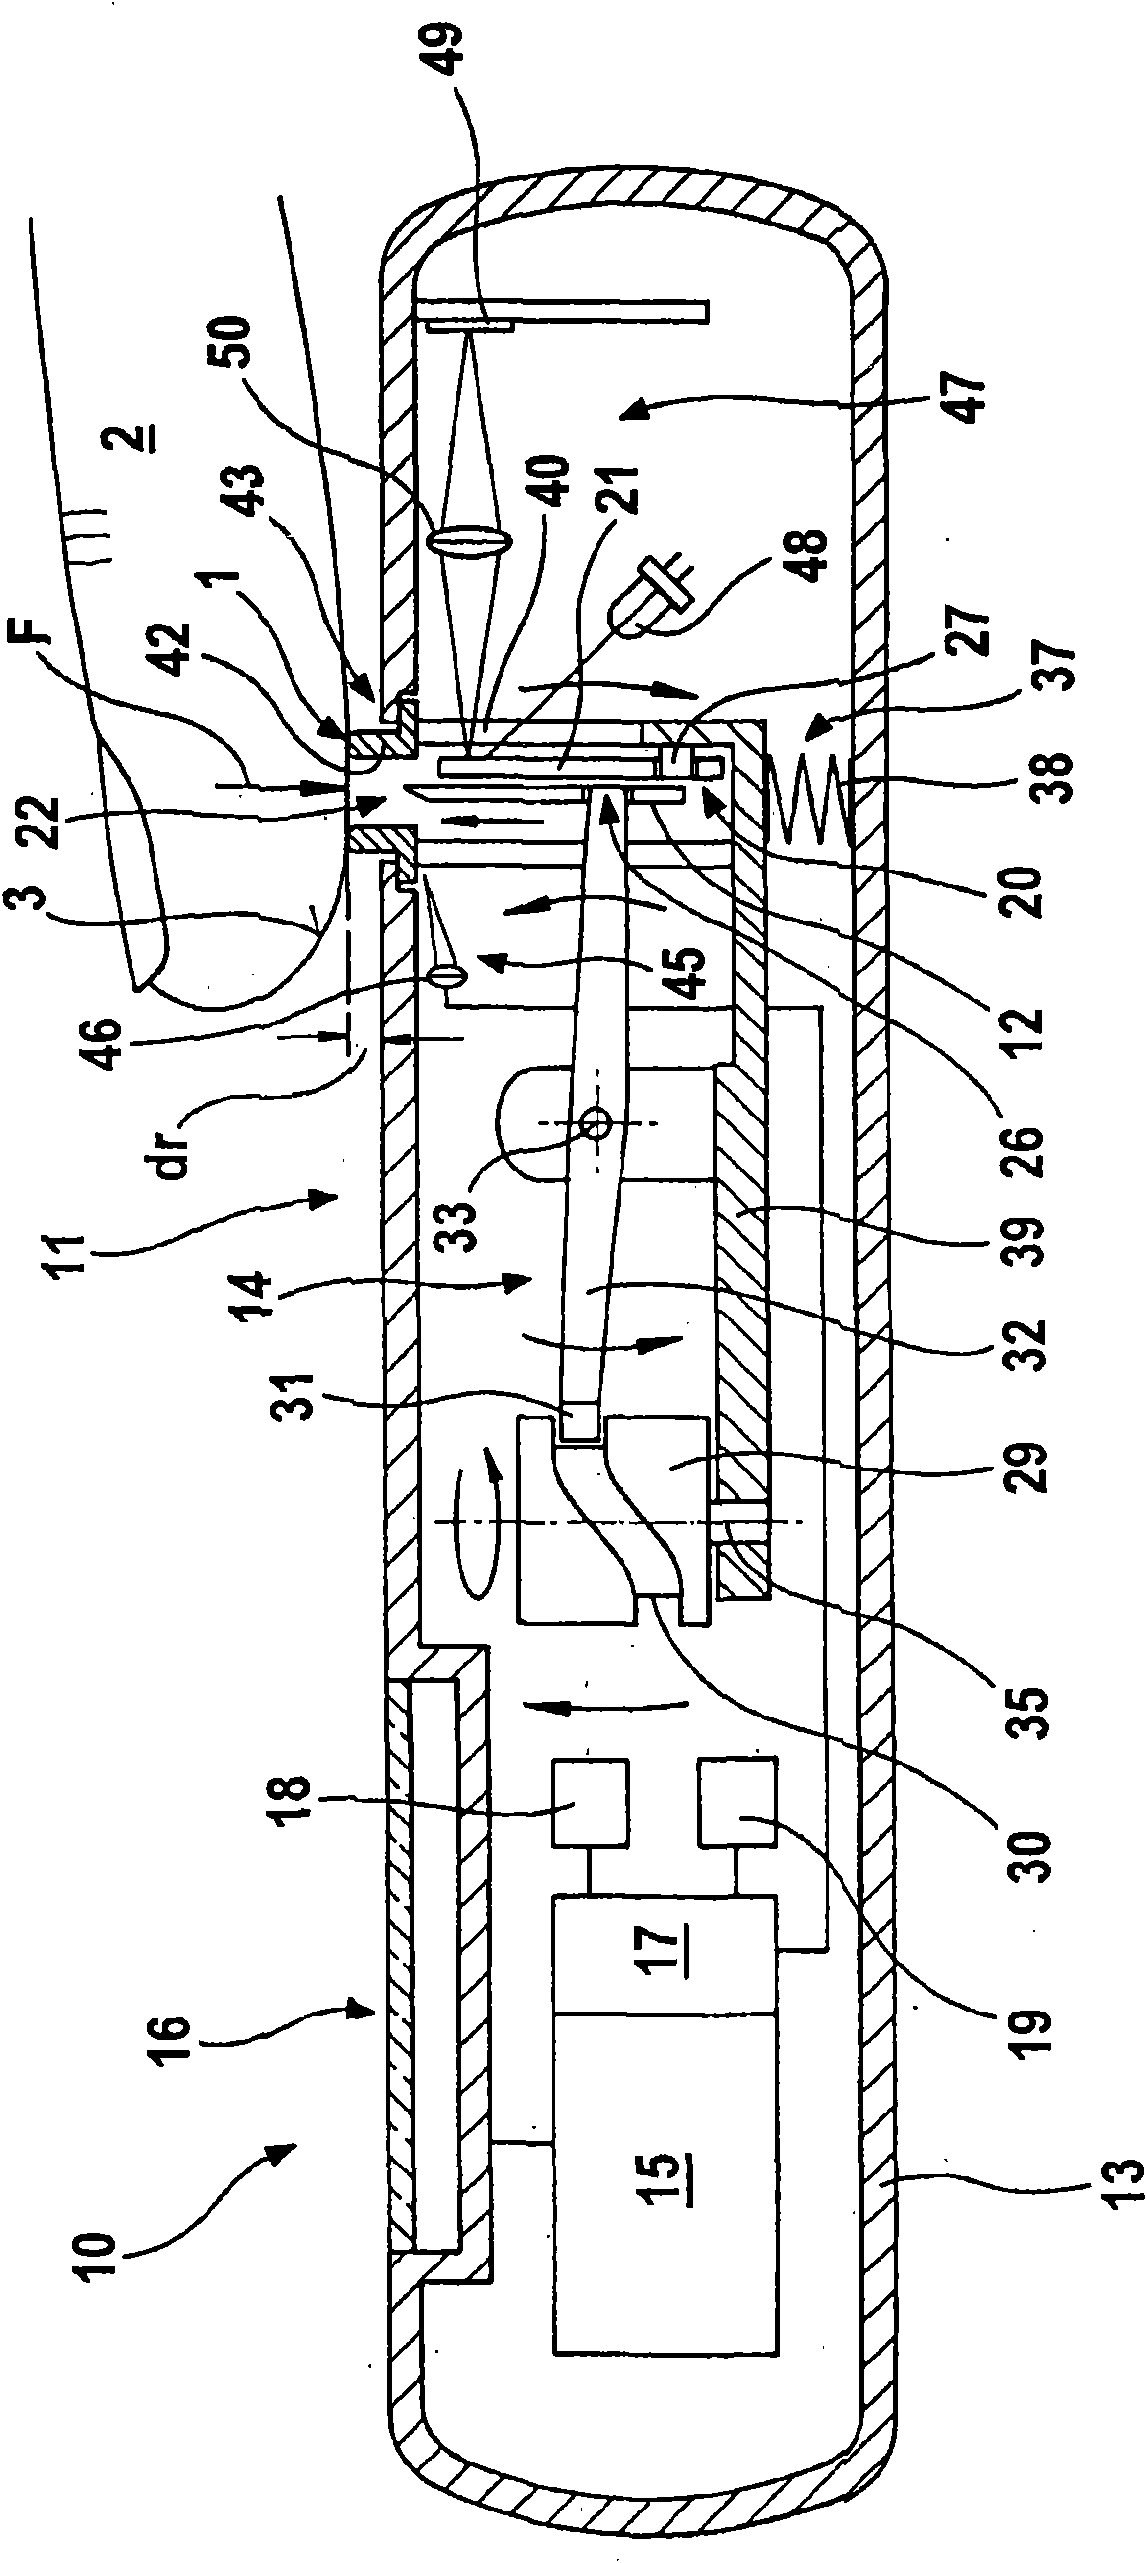 Instrument and system for producing a sample of a body liquid and for analysis thereof